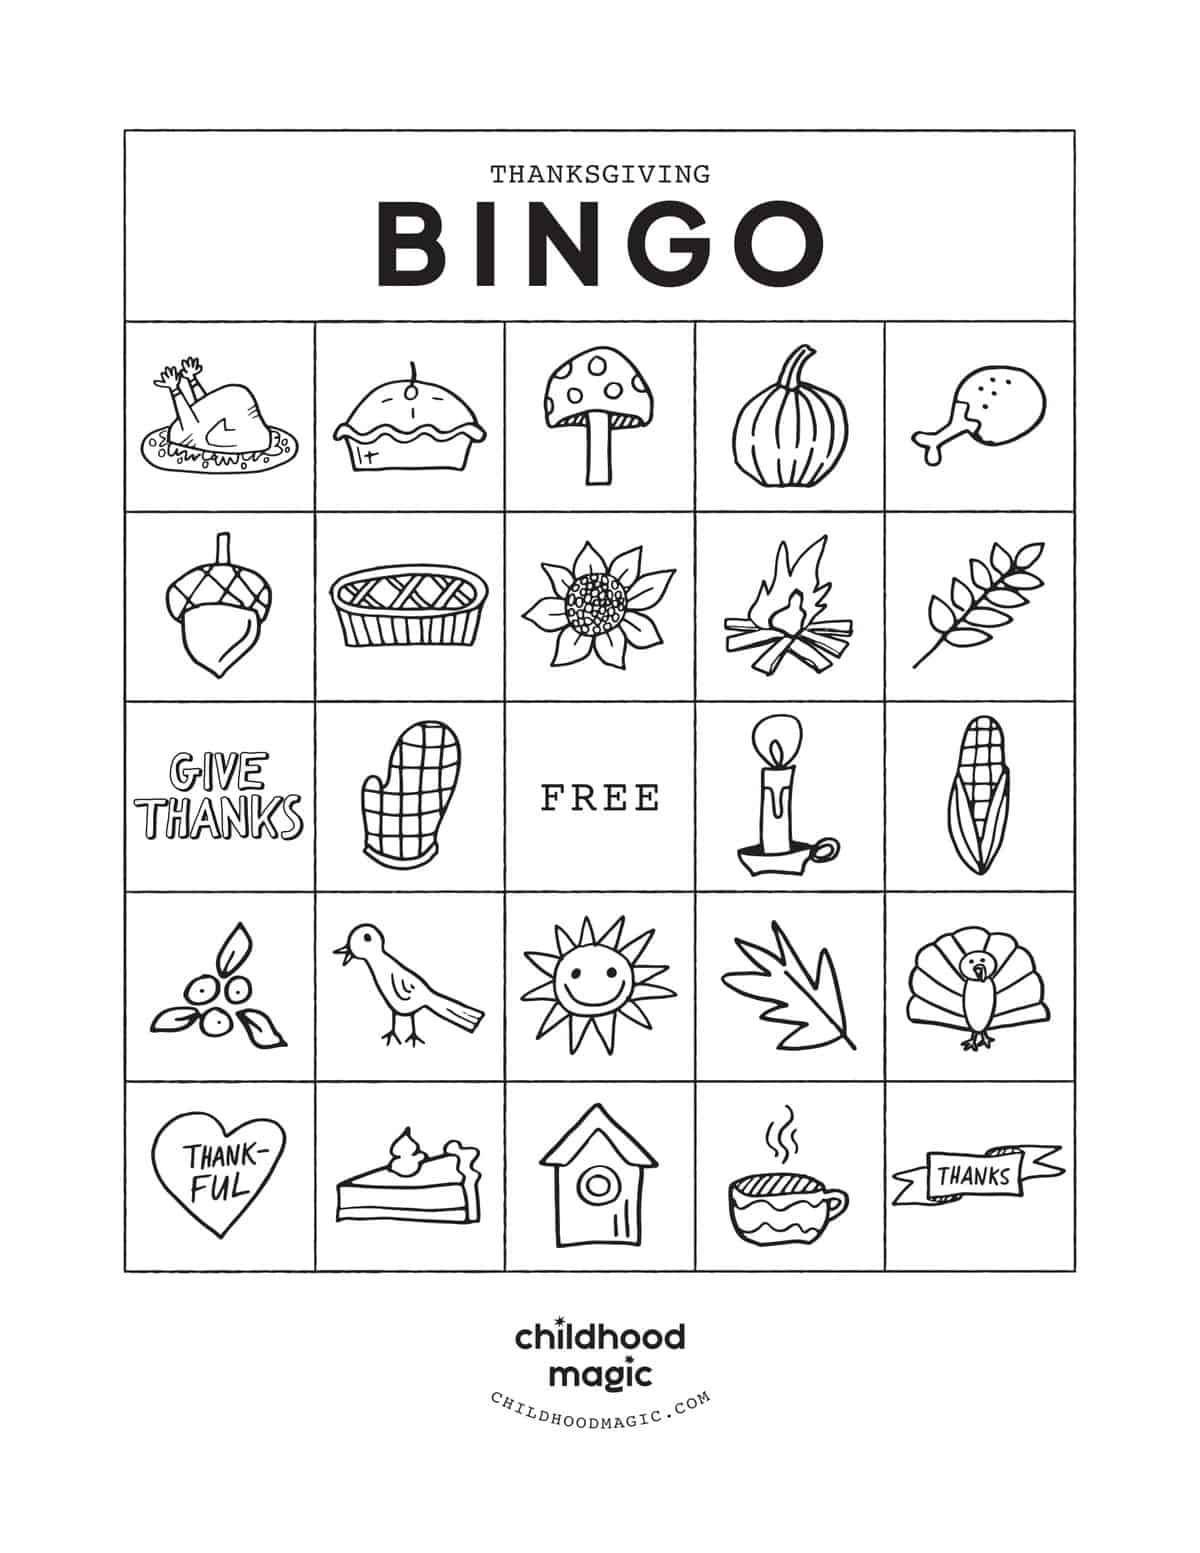 Thanksgiving Bingo card in black and white for printing. 